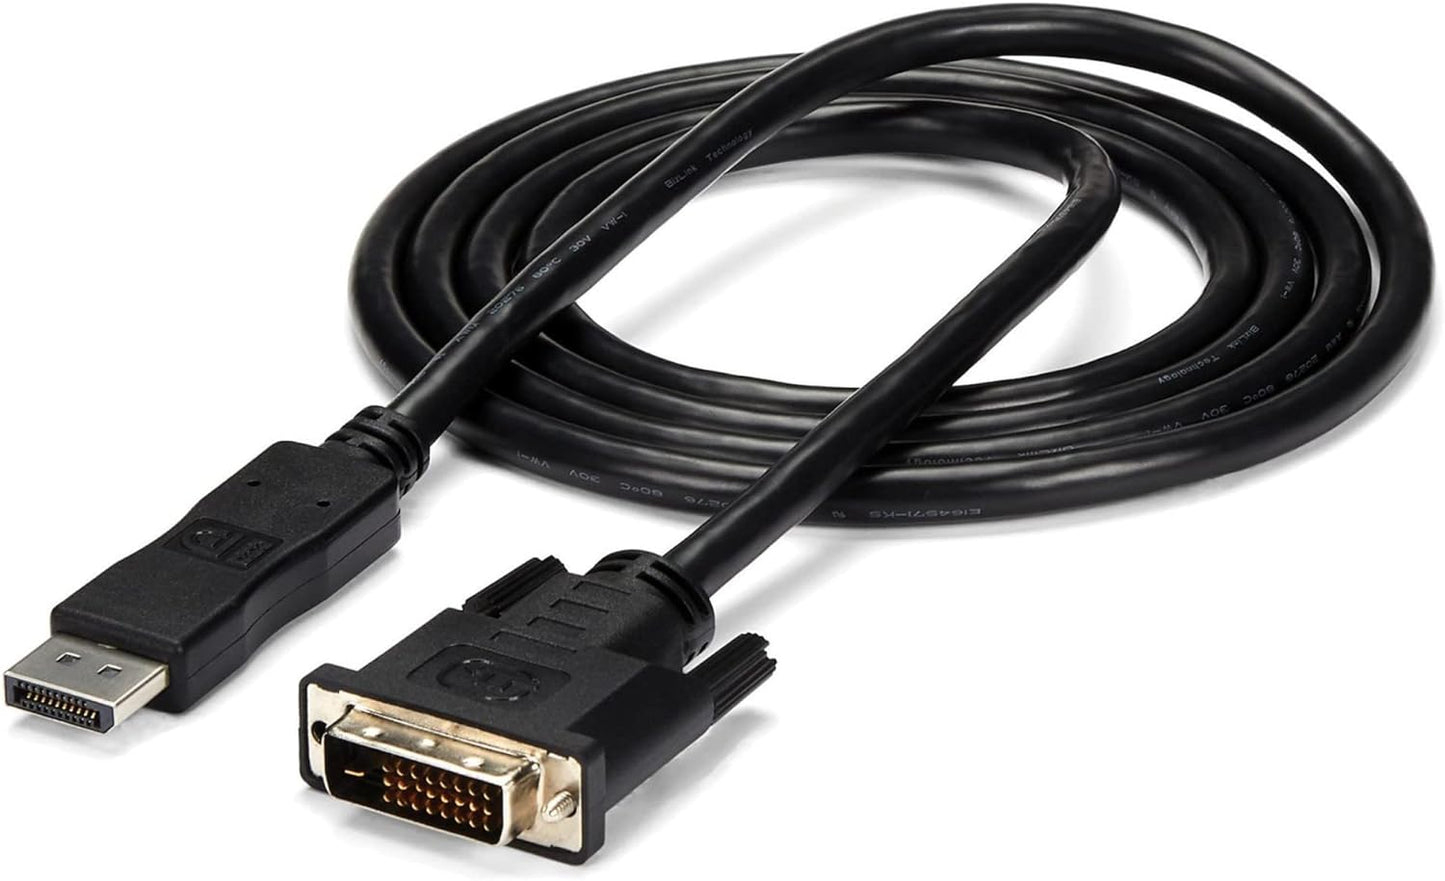 StarTech.com 6ft (1.8m) DisplayPort to DVI Cable - DisplayPort to DVI Adapter Cable 1080p Video - DisplayPort to DVI-D Cable Single Link - DP to DVI Monitor Cable - DP 1.2 to DVI Converter (DP2DVIMM6)